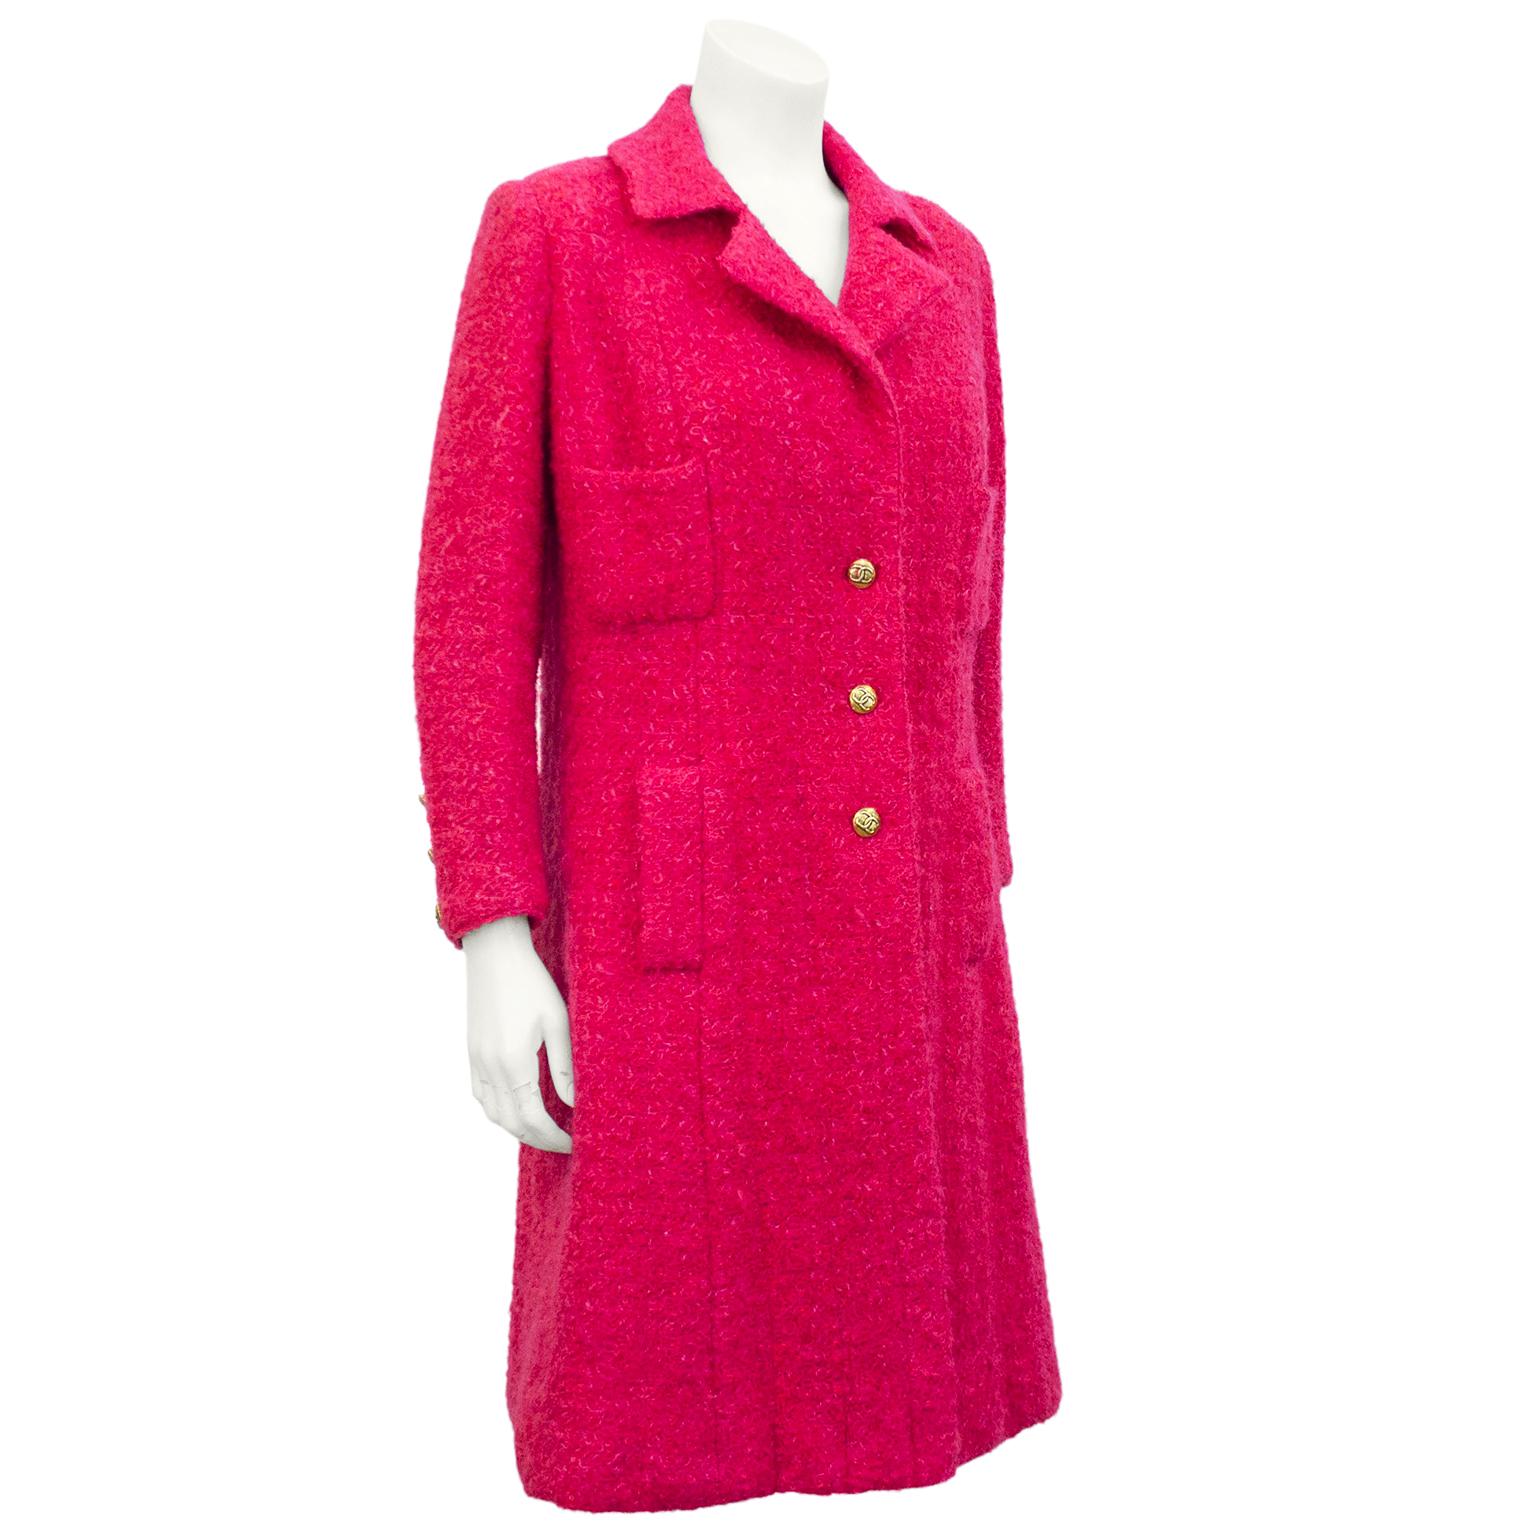 Superb raspberry wool bouclé Chanel haute couture coat dress from the mid 1970's. Single breasted classic silhouette with 2 patch pockets on the upper bodice and 2 hip pockets with flanges. Fully lined in matching silk with gold link chain at the